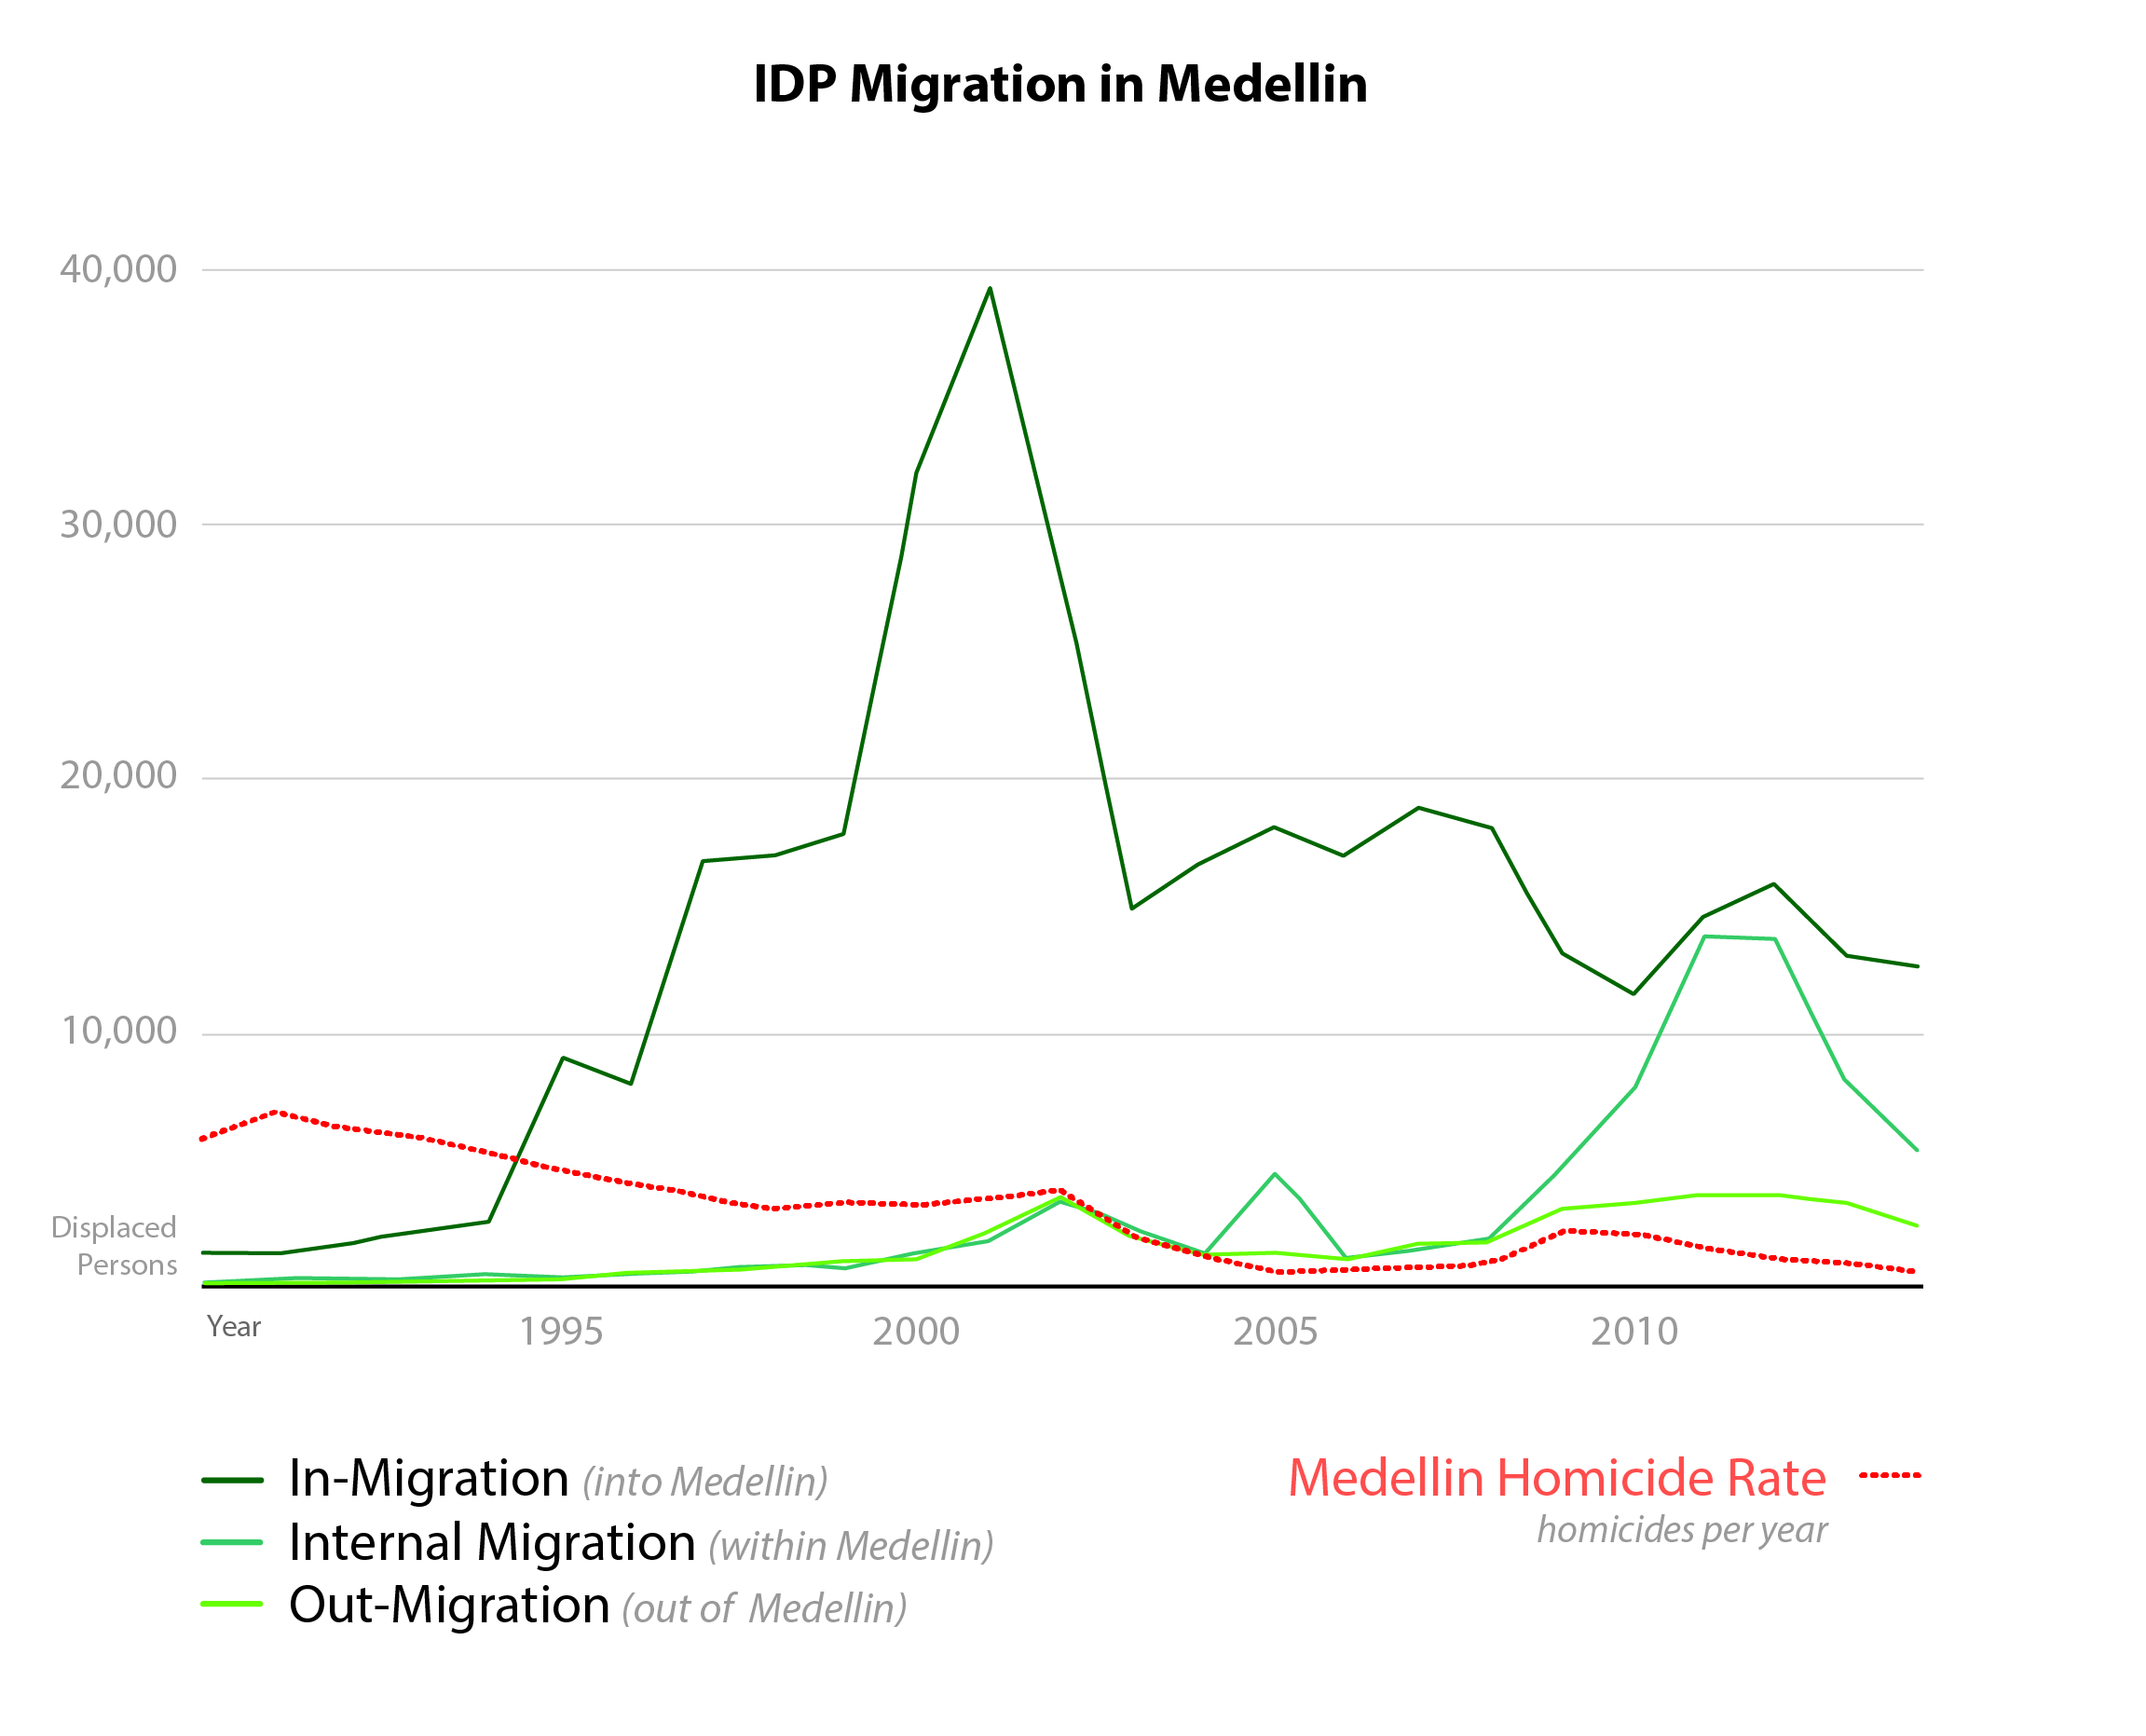 graph illustrating the flow of IDPs to/from Medellin